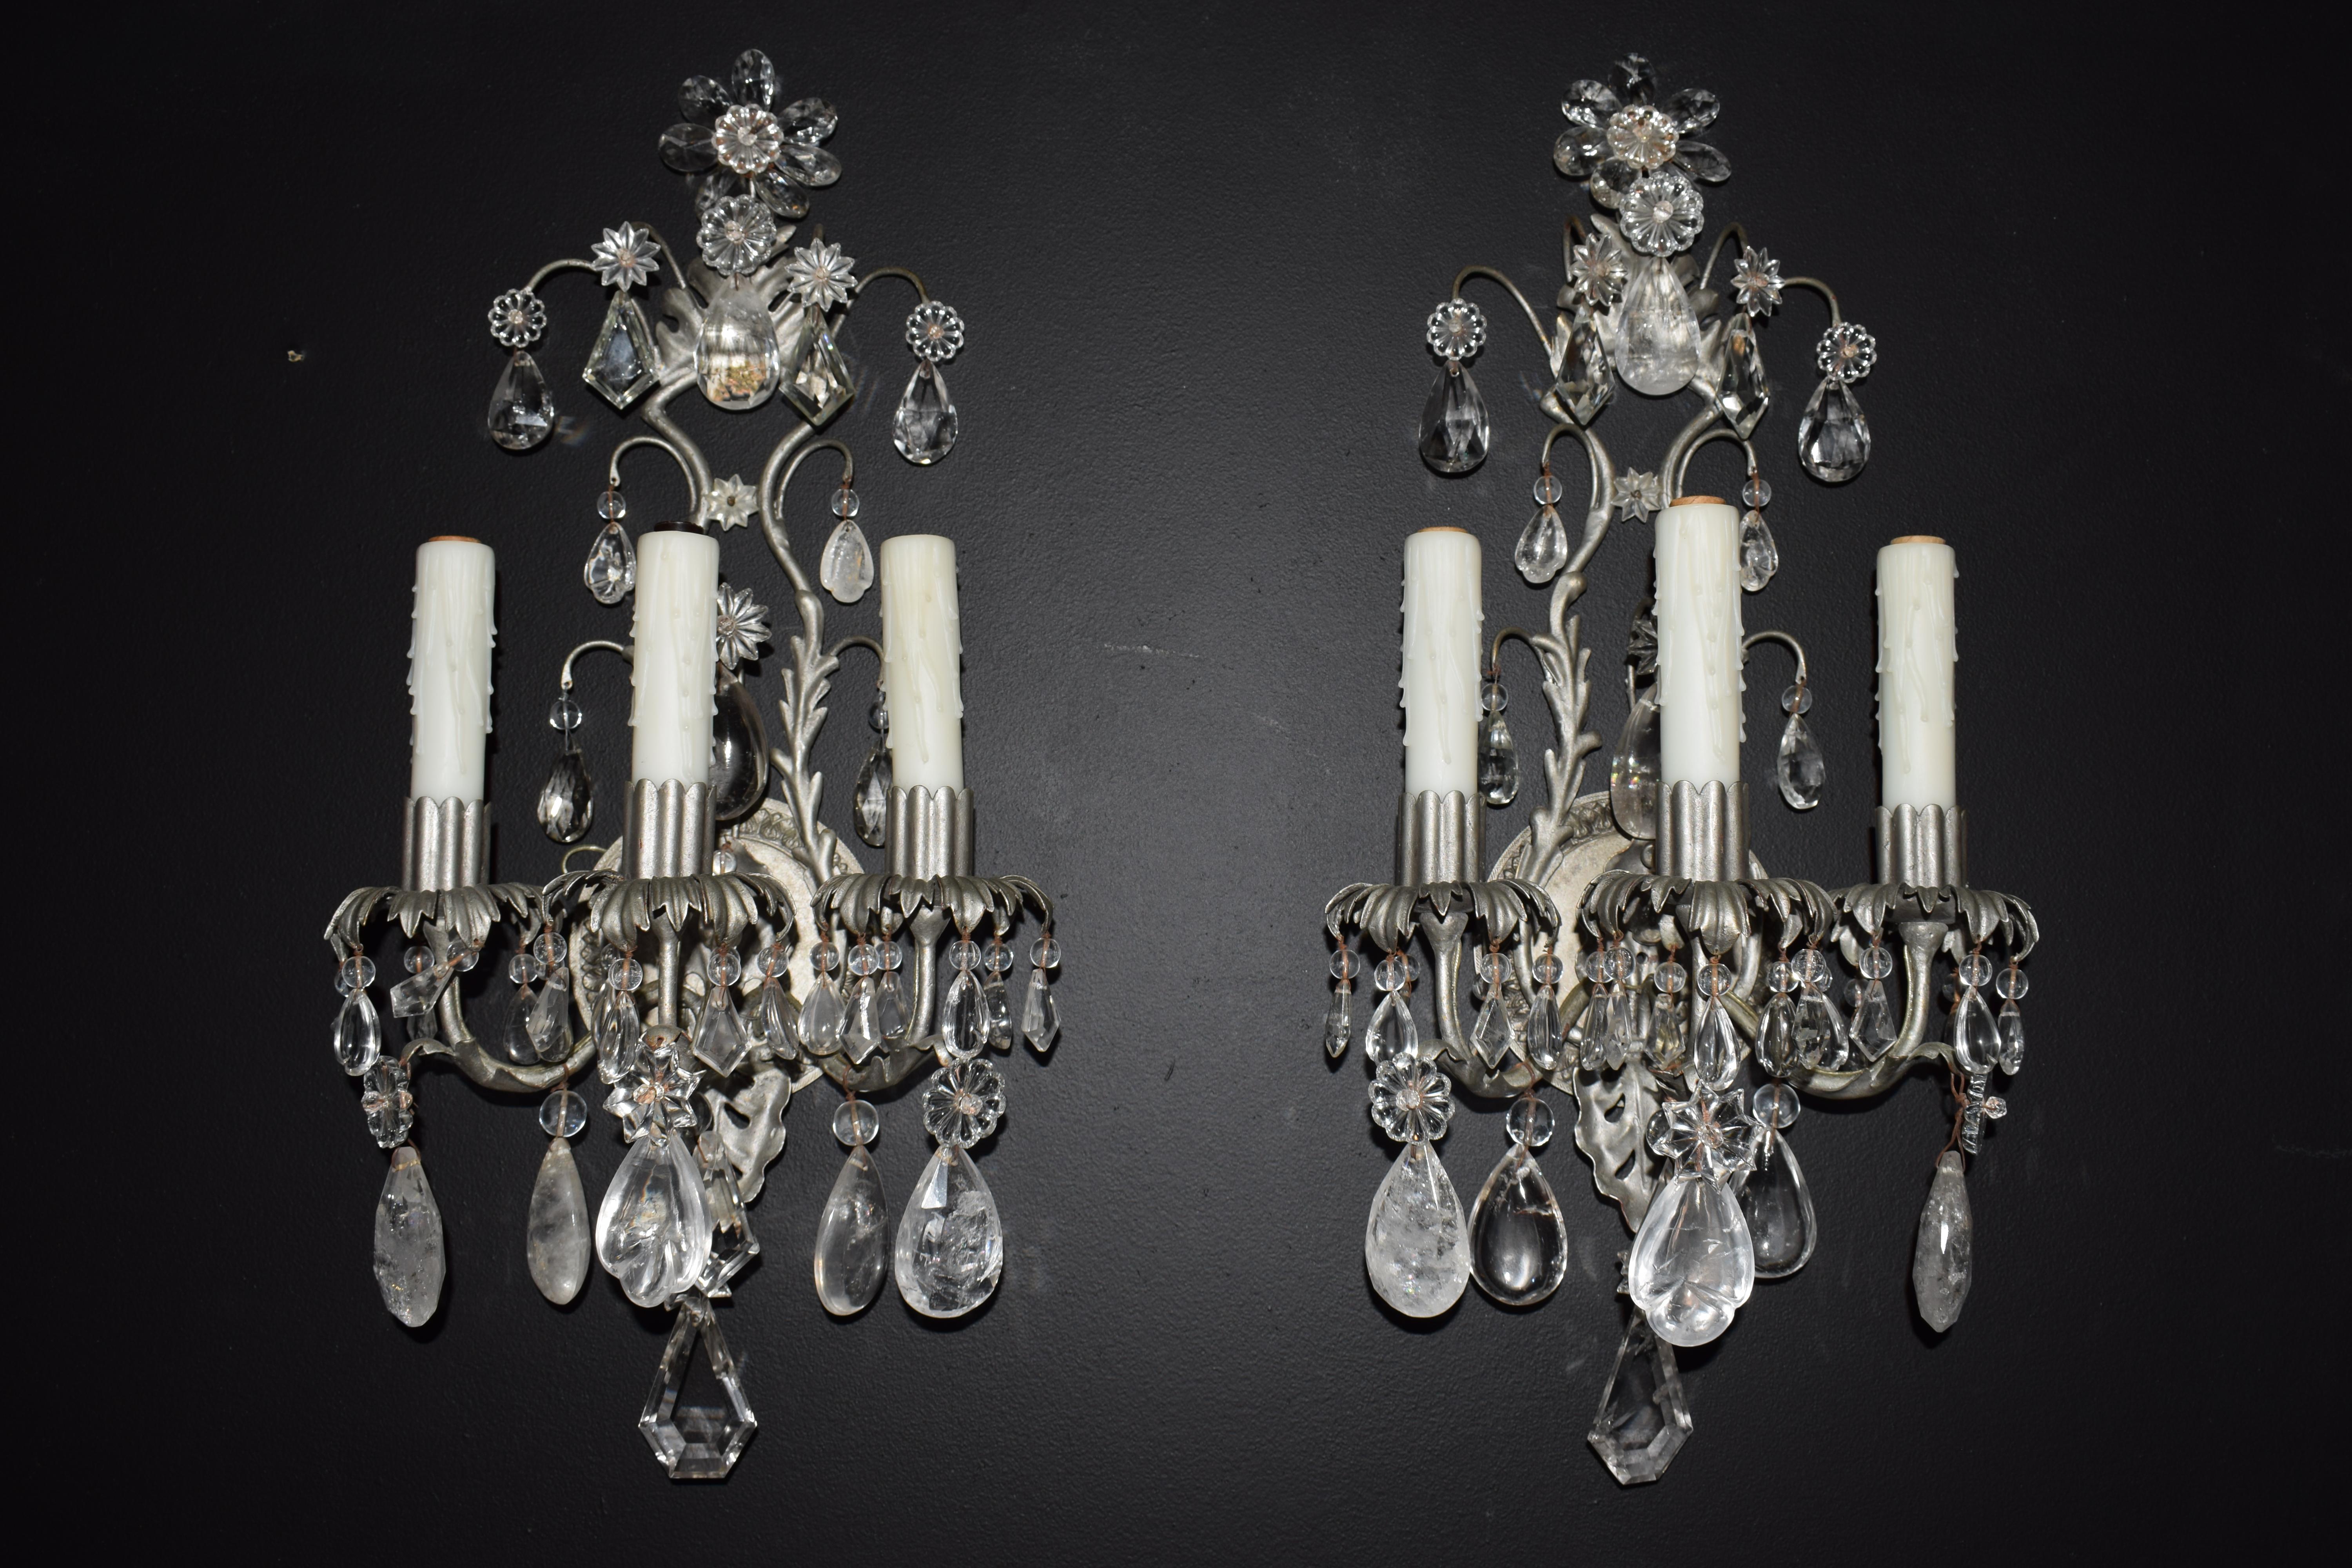 A fine pair of silvered, crystal and rock crystal wall sconces,
France, circa 1940. 3 lights
Dimensions: Height 23